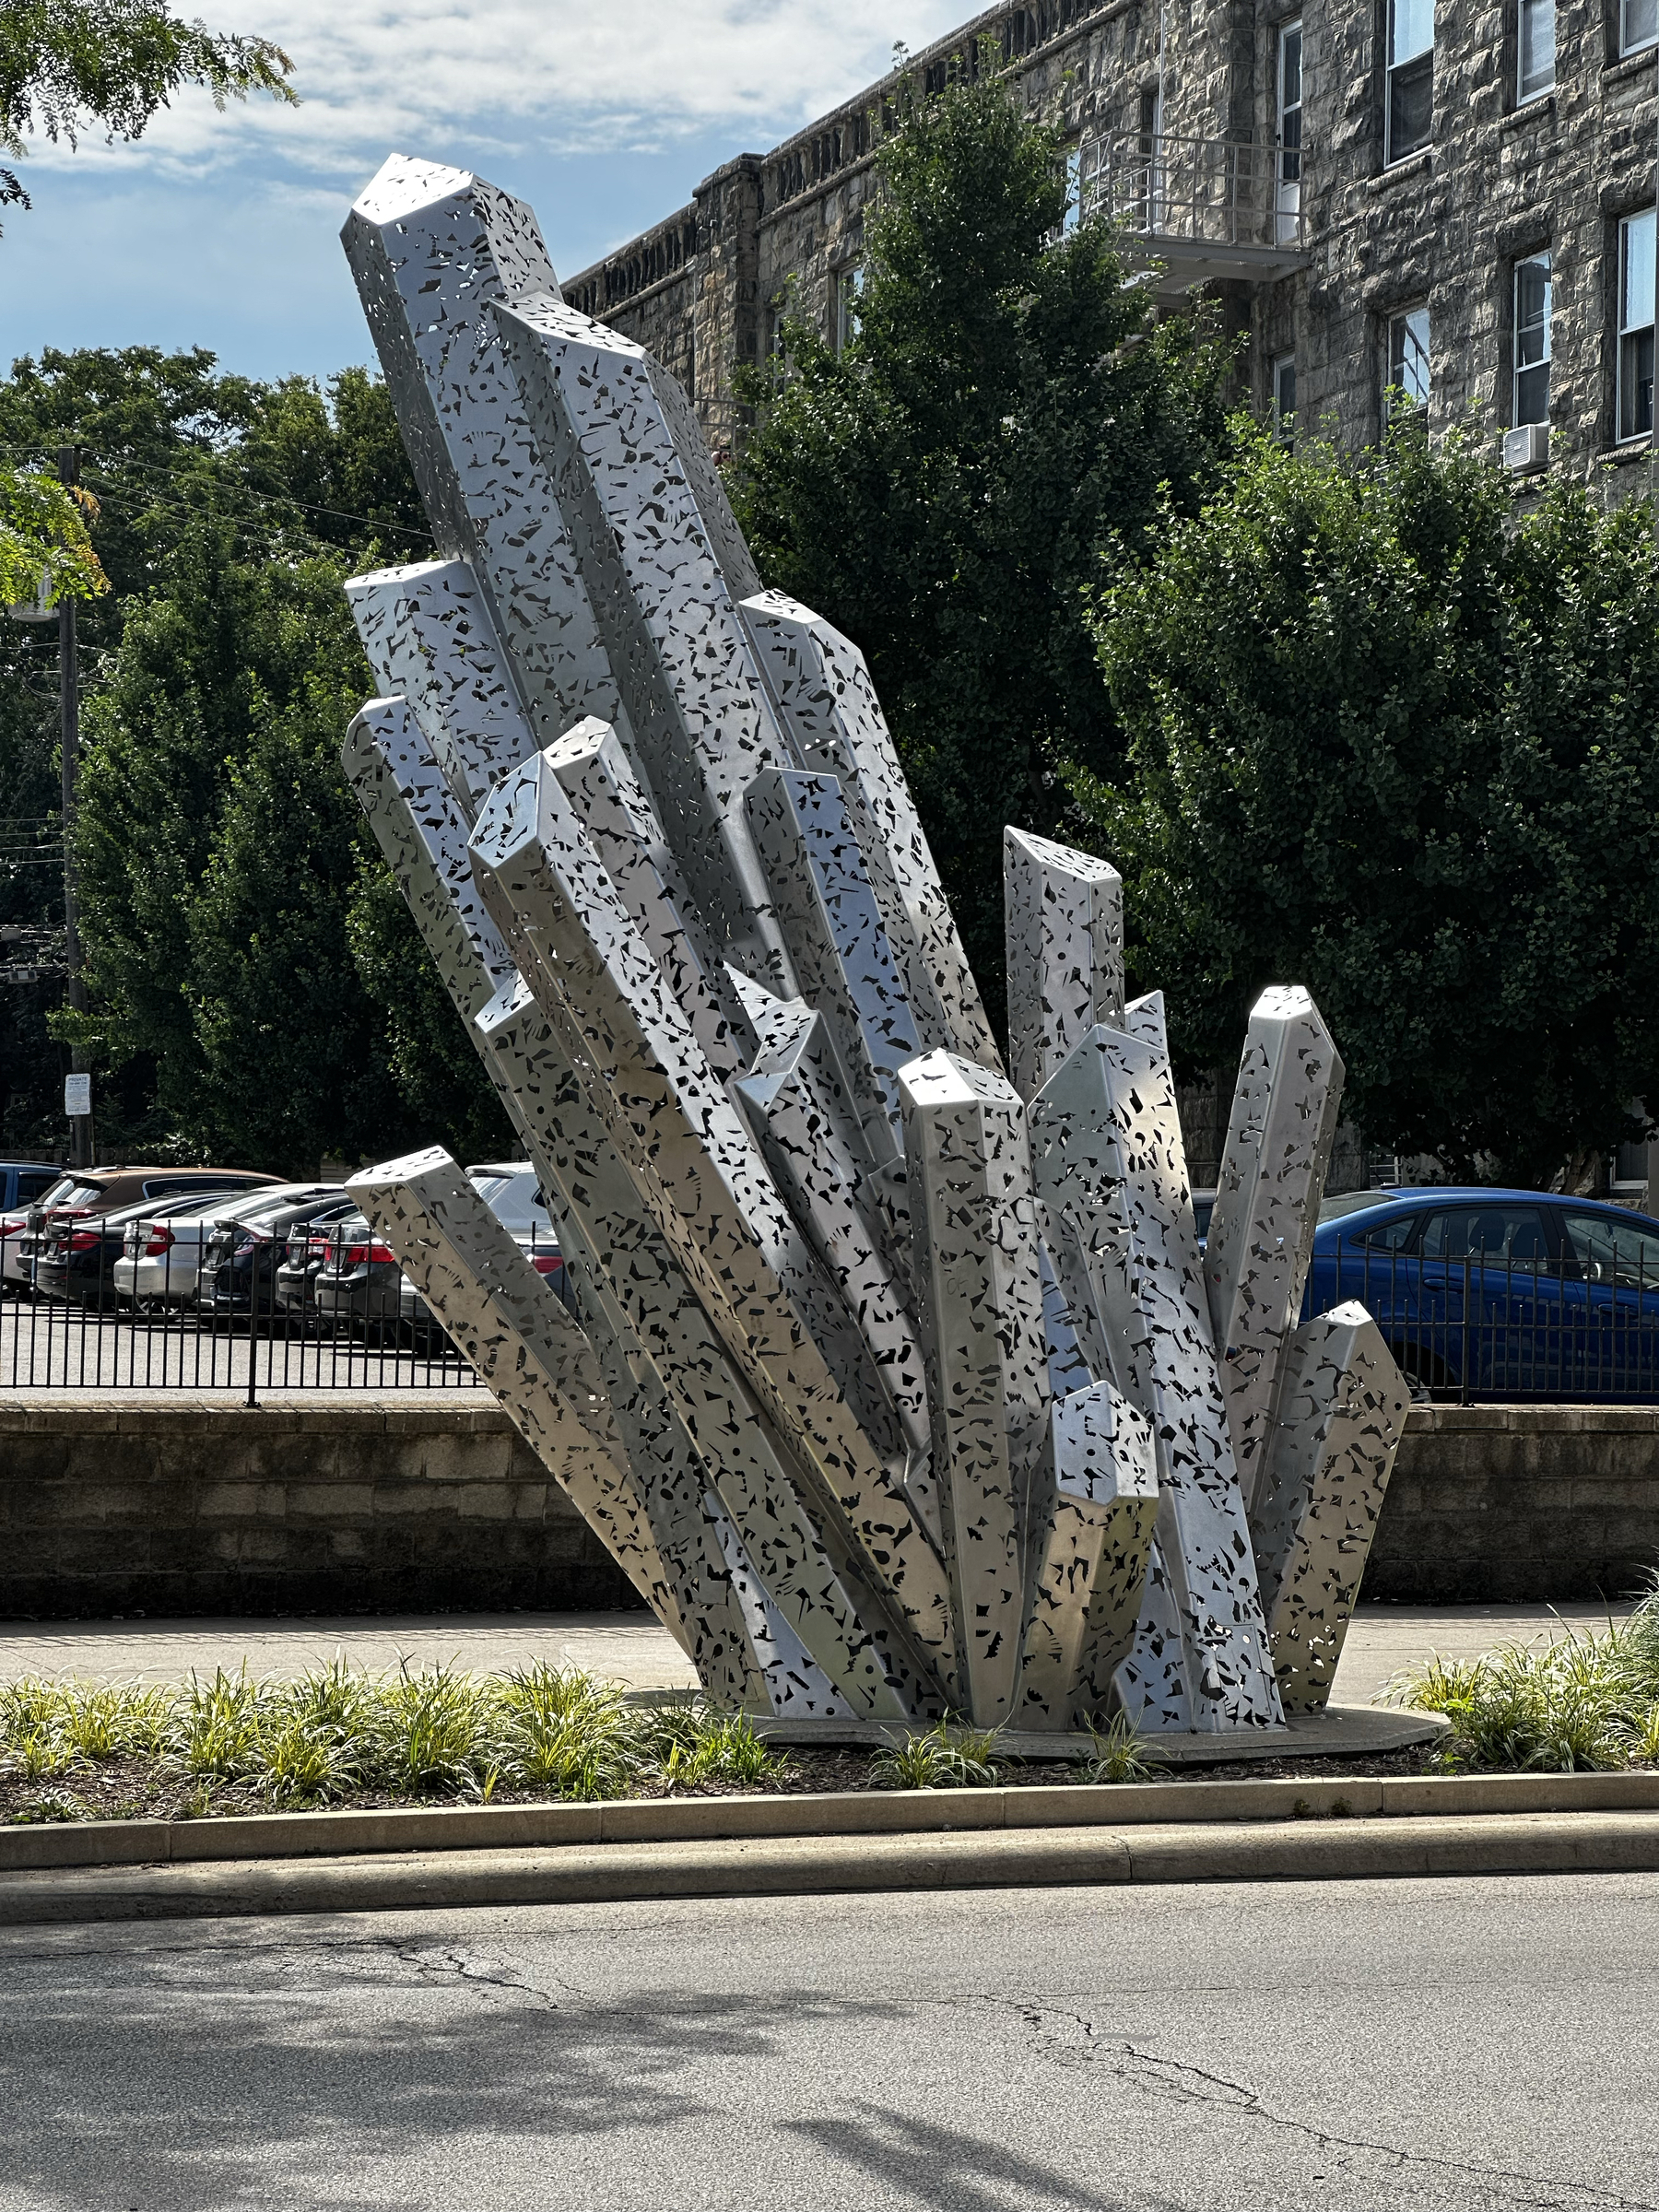 A silver sculpture on the street that has a crystal-look